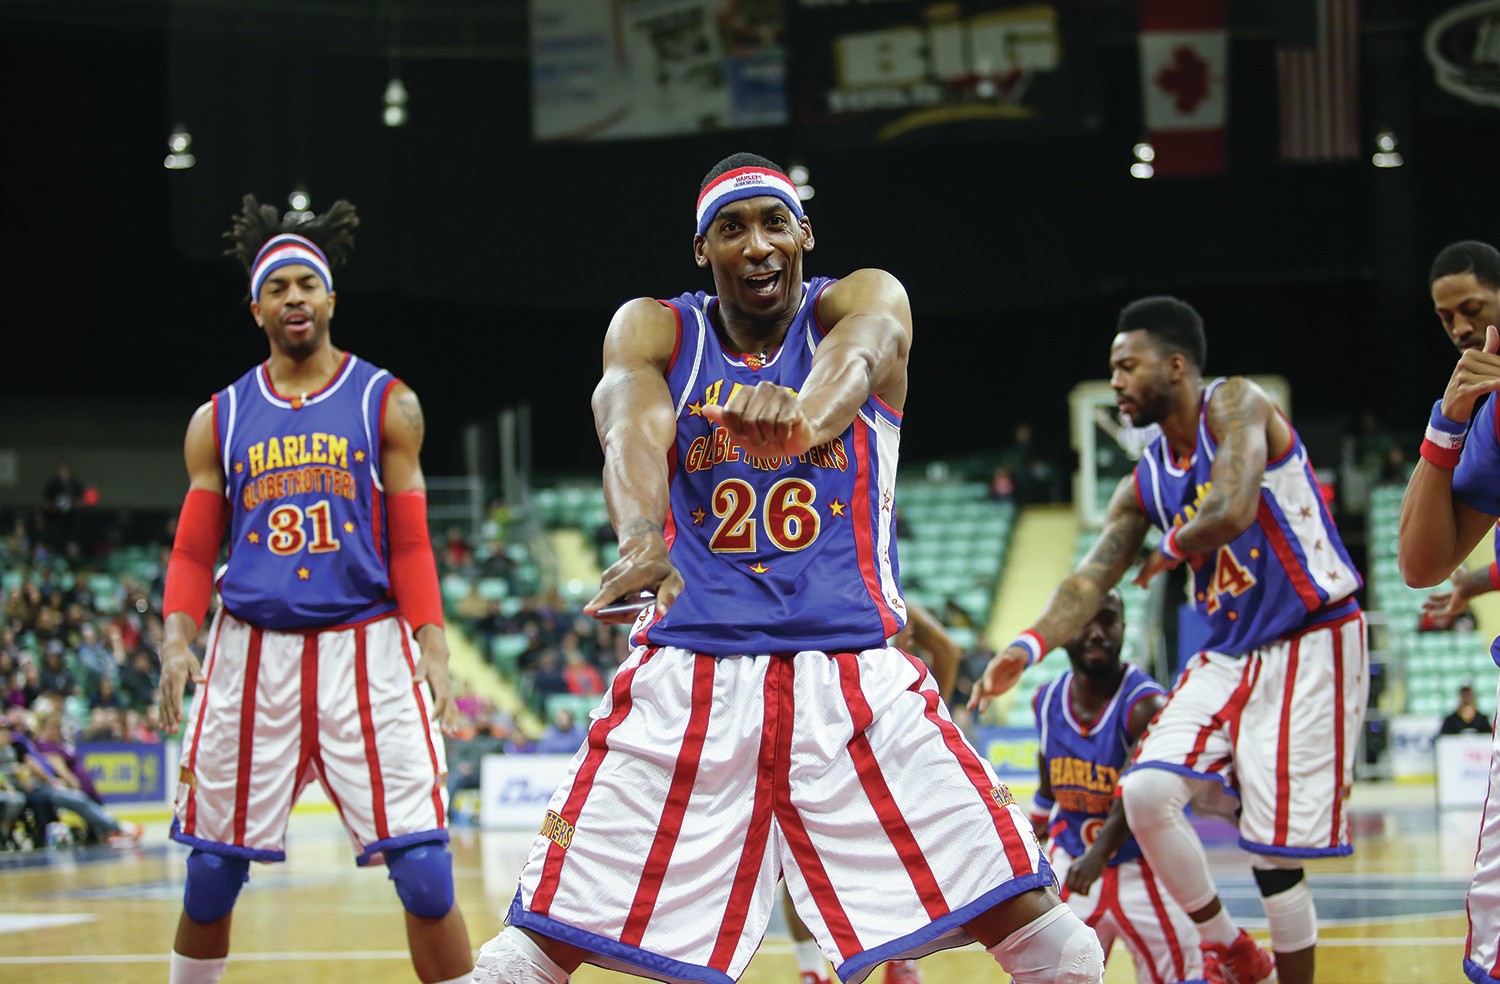 ENTERTAINING - The Harlem Globetrotters slam dunked their way into Red Deer and entertained a full crowd.